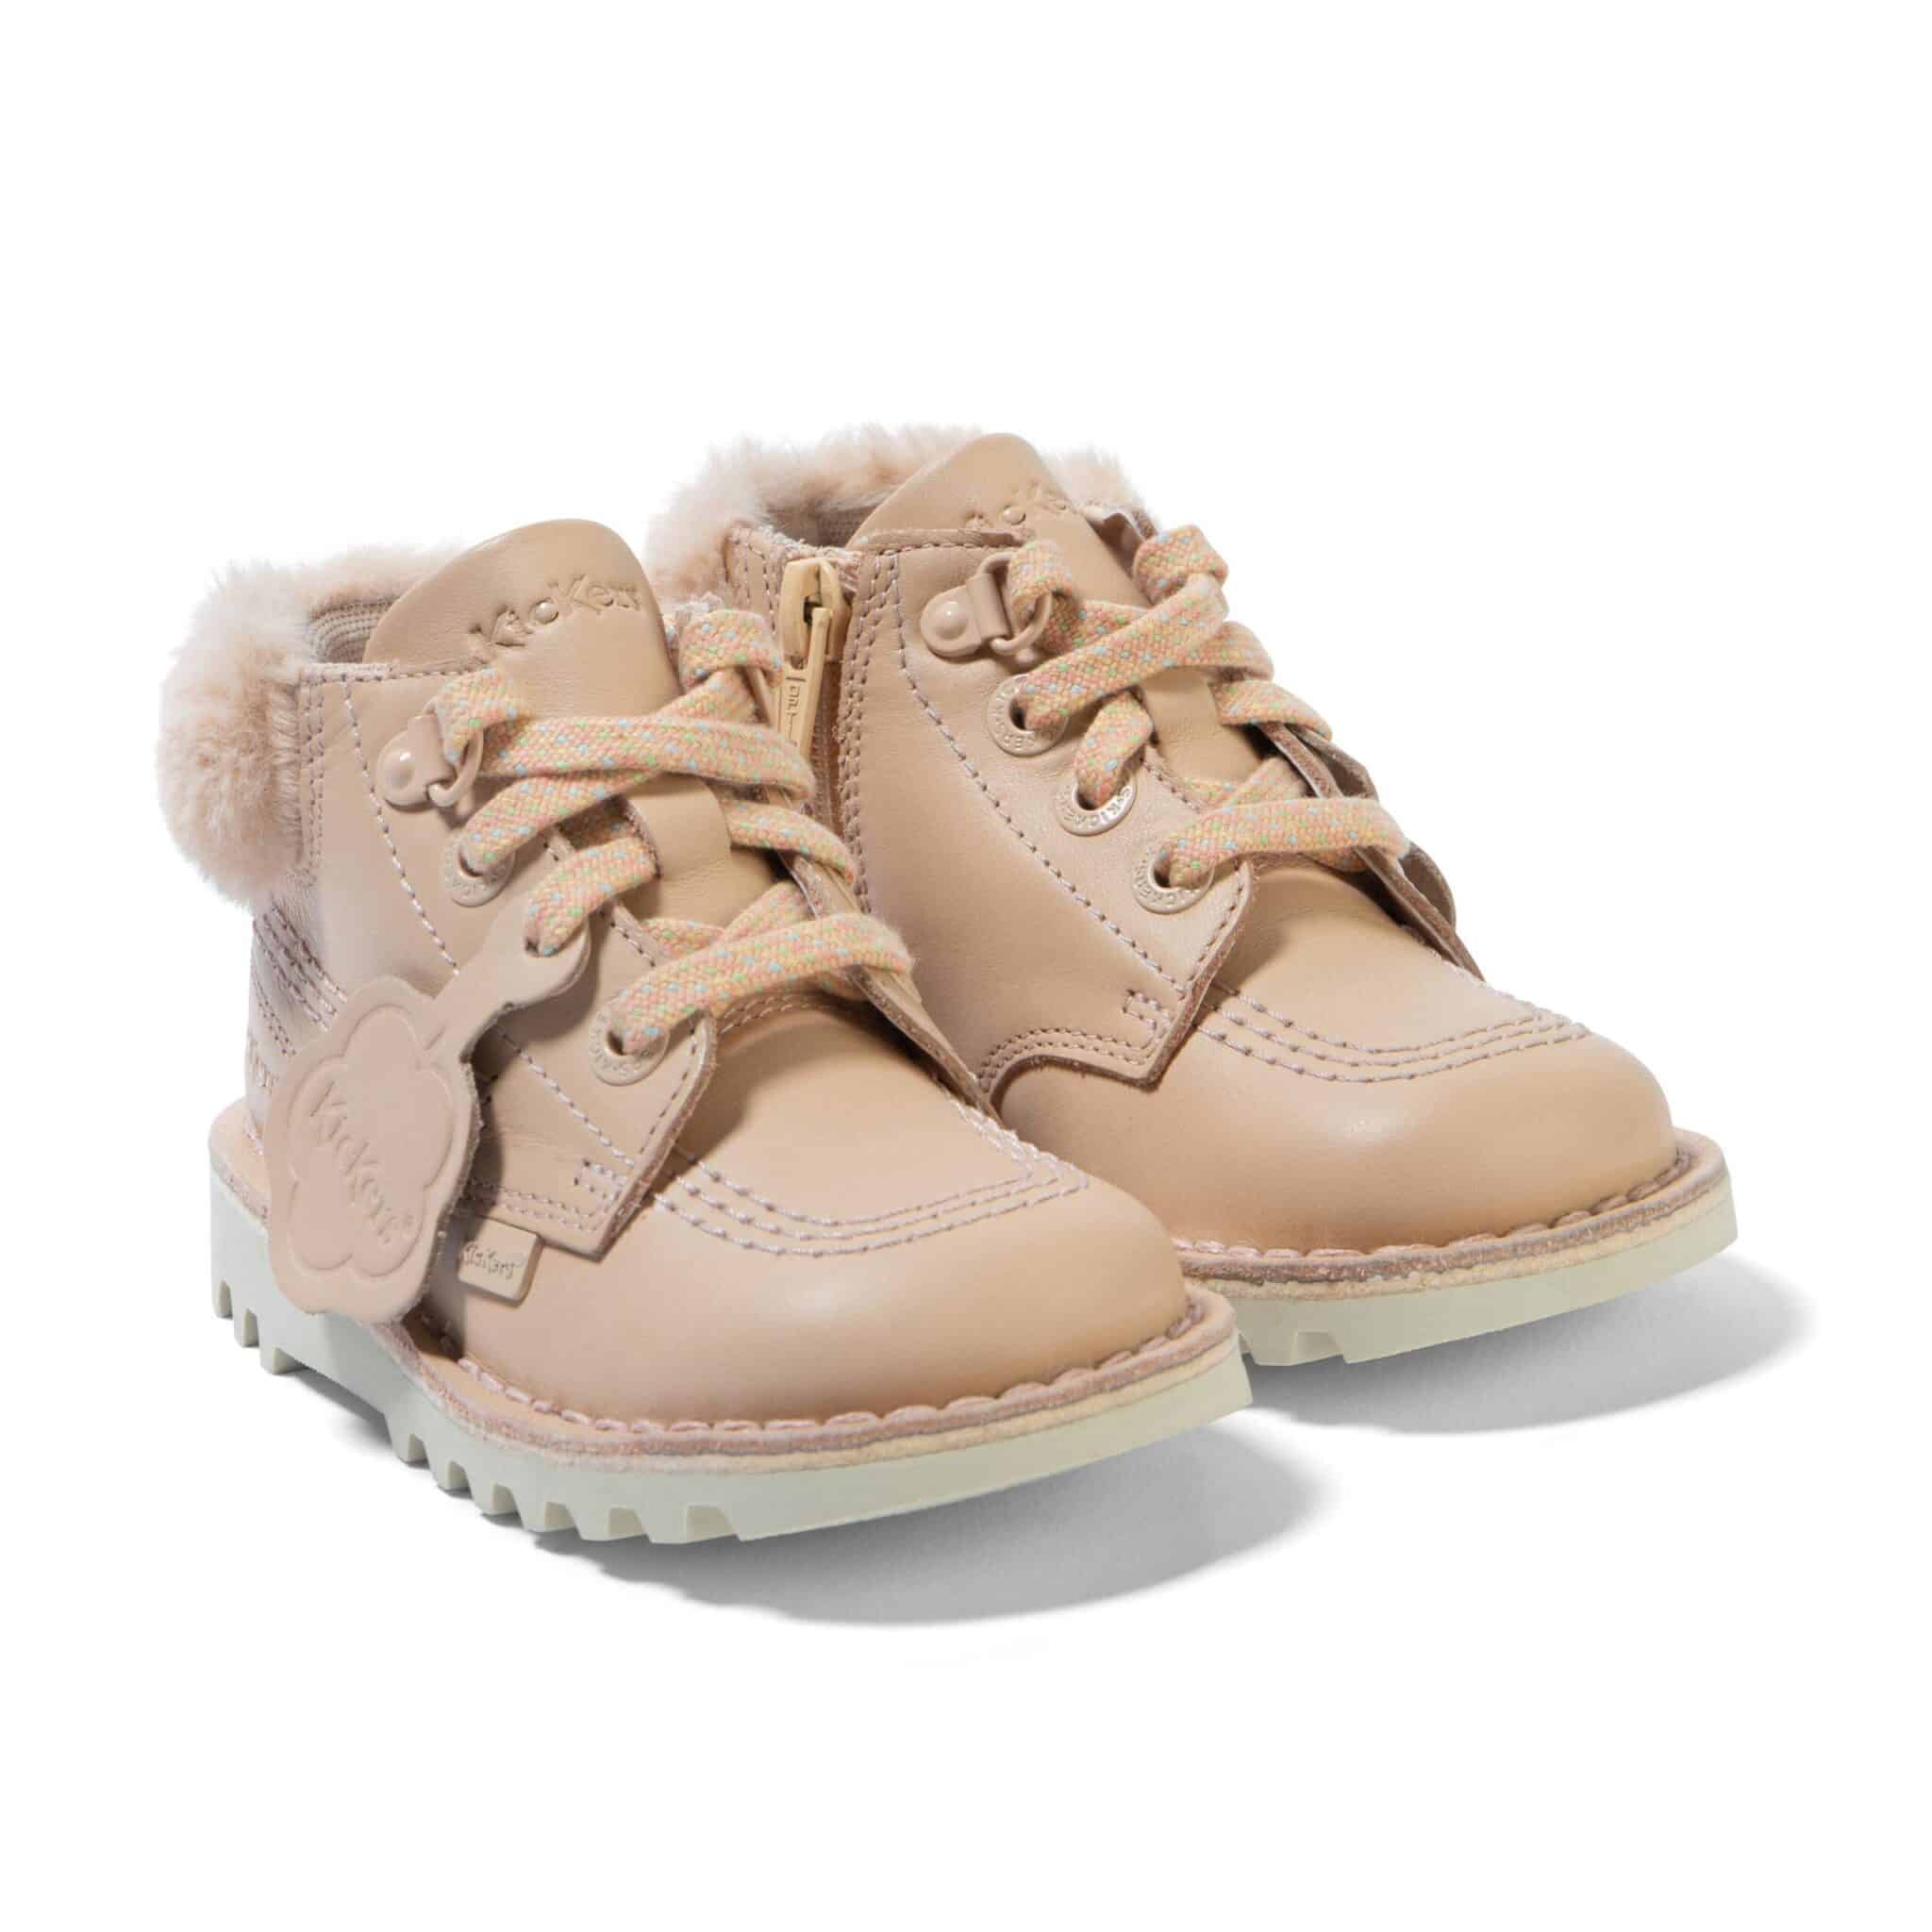 kickers tan leather high top boys warm boots side